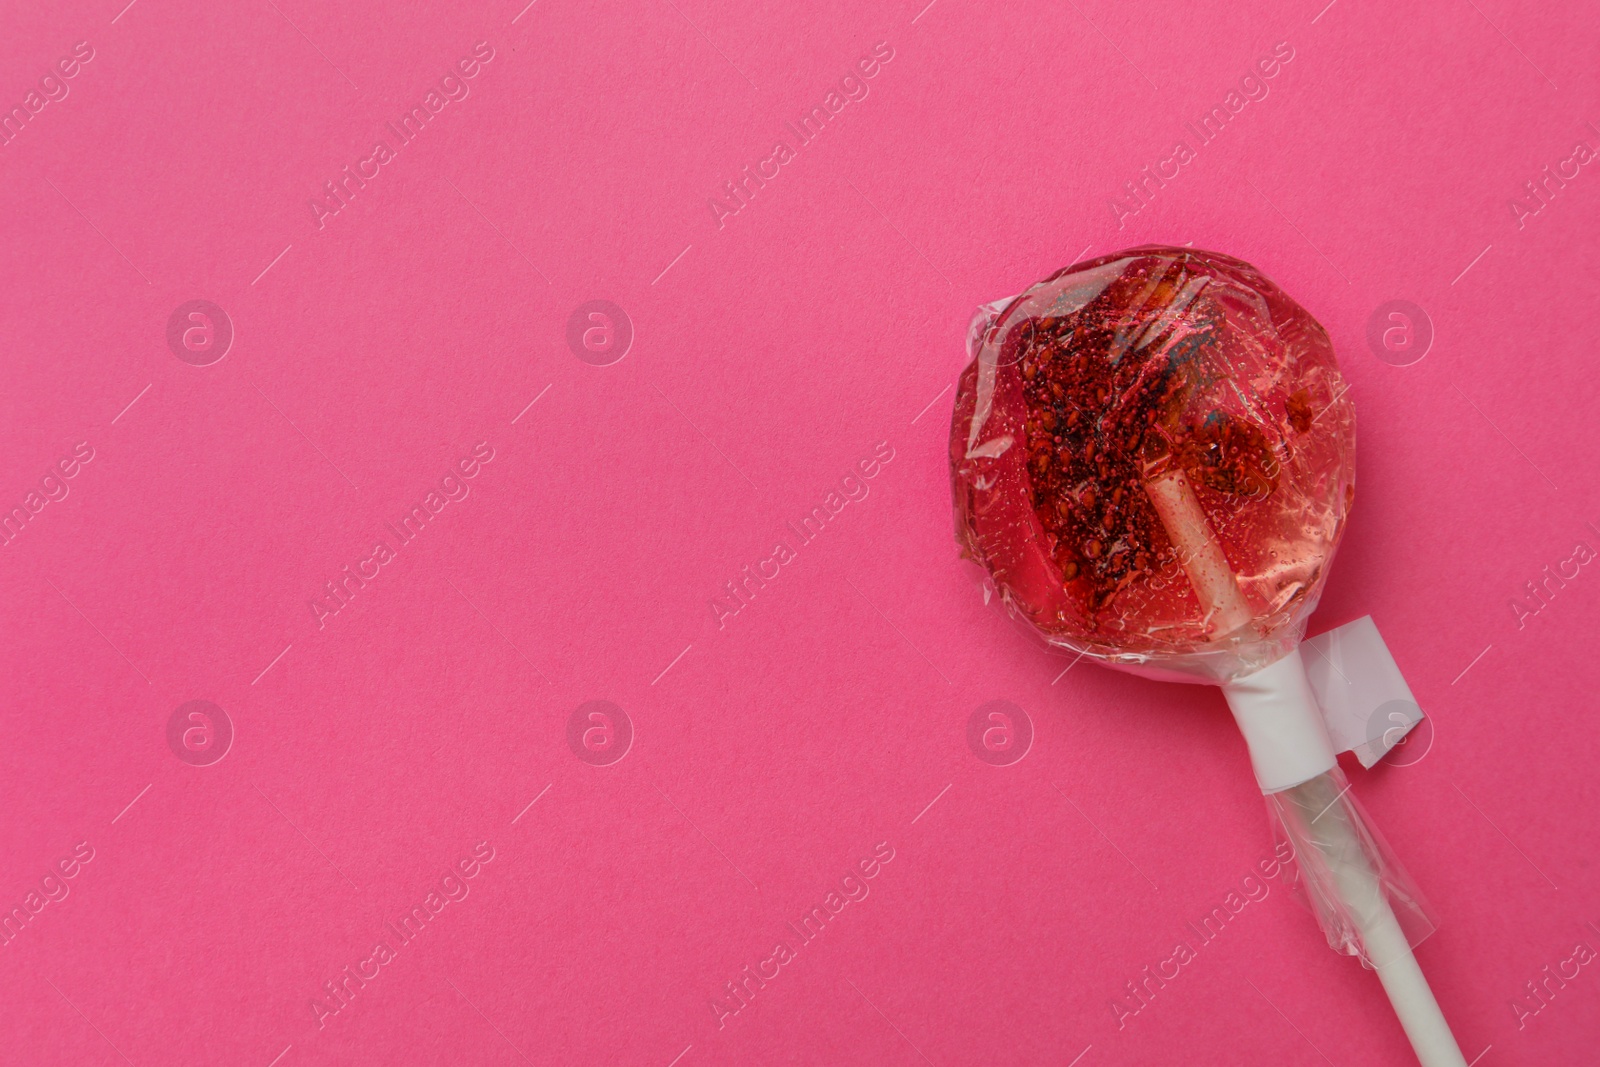 Photo of Sweet colorful lollipop with berries on pink background, top view. Space for text